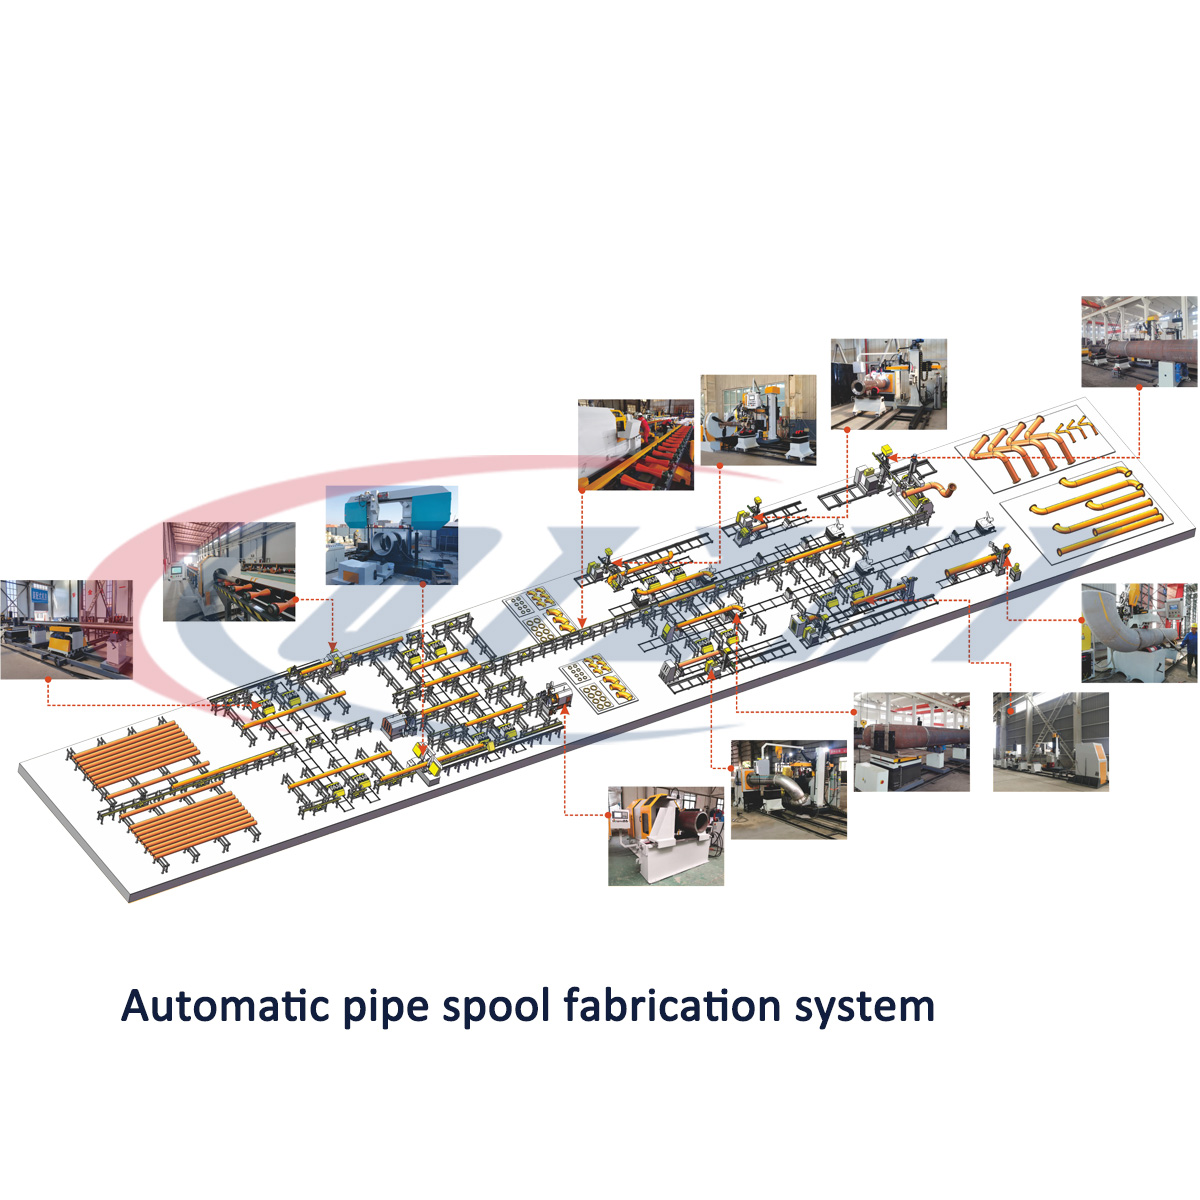 Pipe Spool Fabrication System